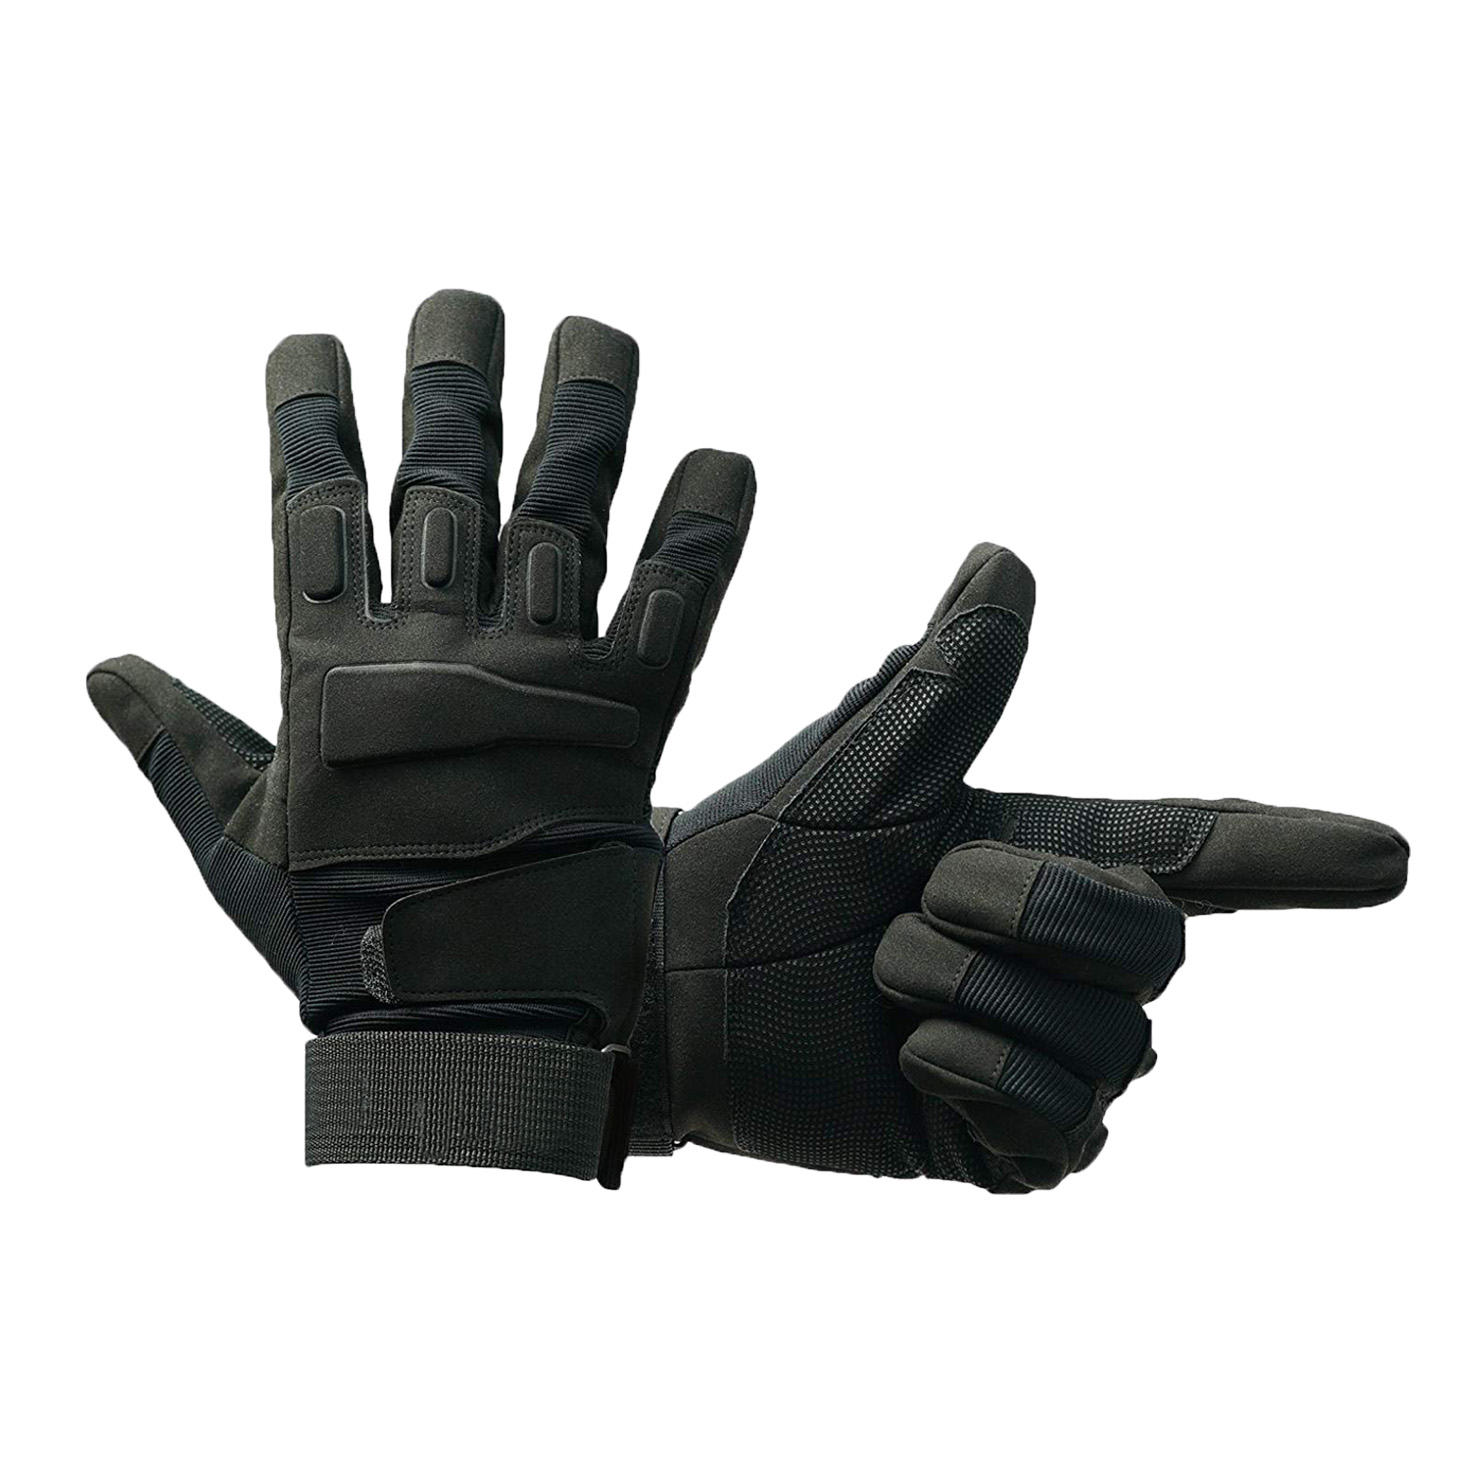 NEW Black Tactical motorcycle Gloves Dexterity and Grip Light Weight Military Tactical Gloves